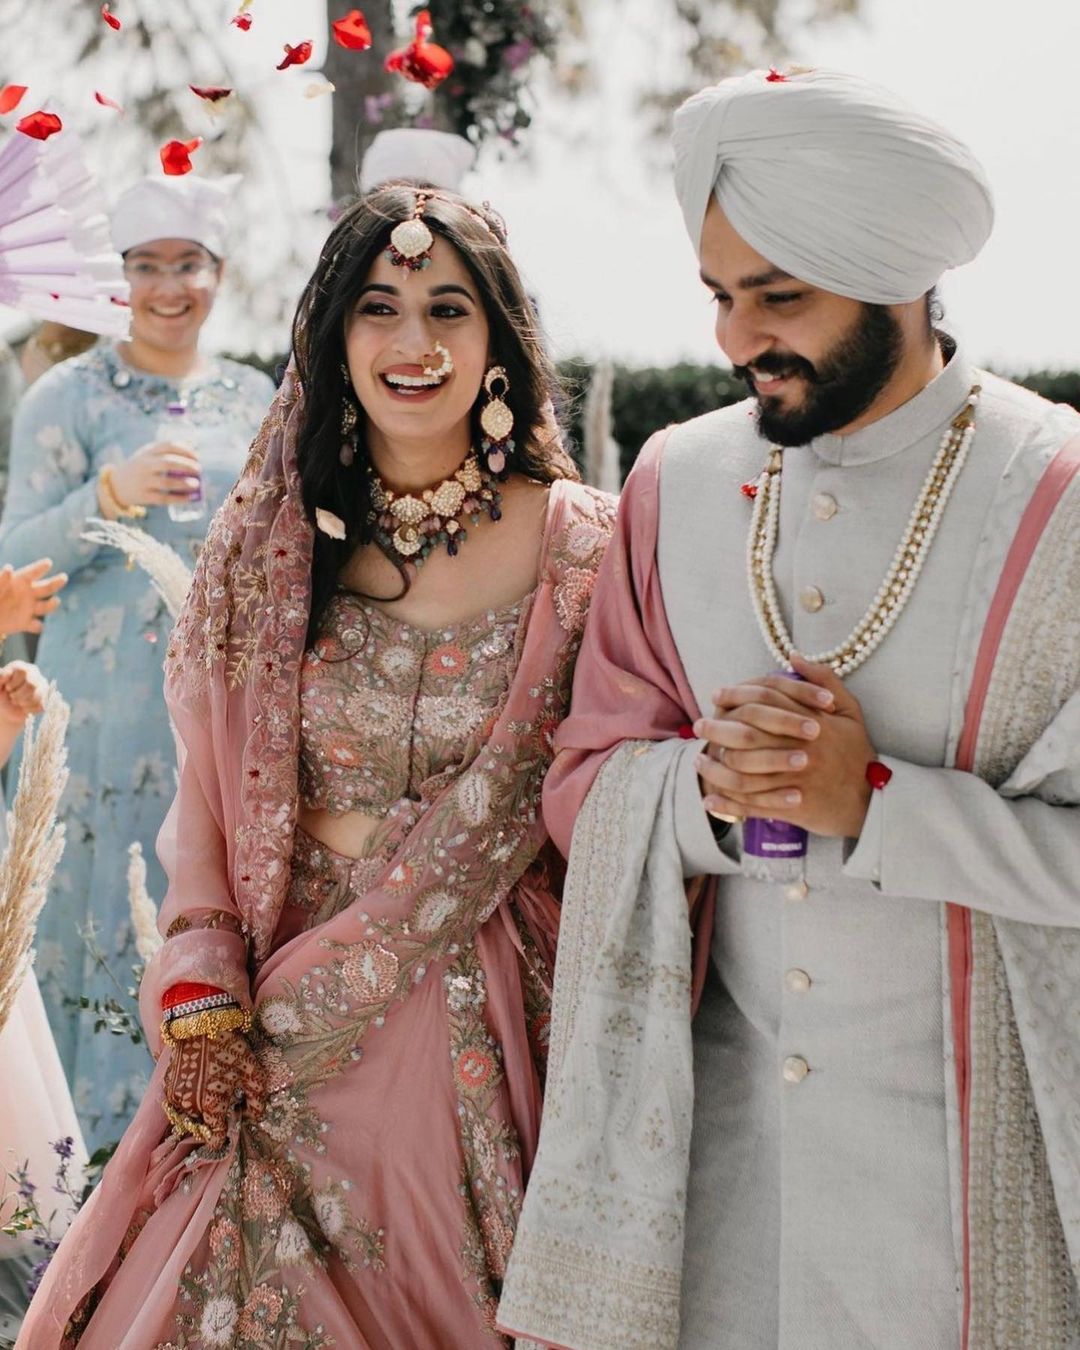 The Bride Donned A Rose Pink 'Lehenga' With Open Hairstyle For Her Day  Wedding